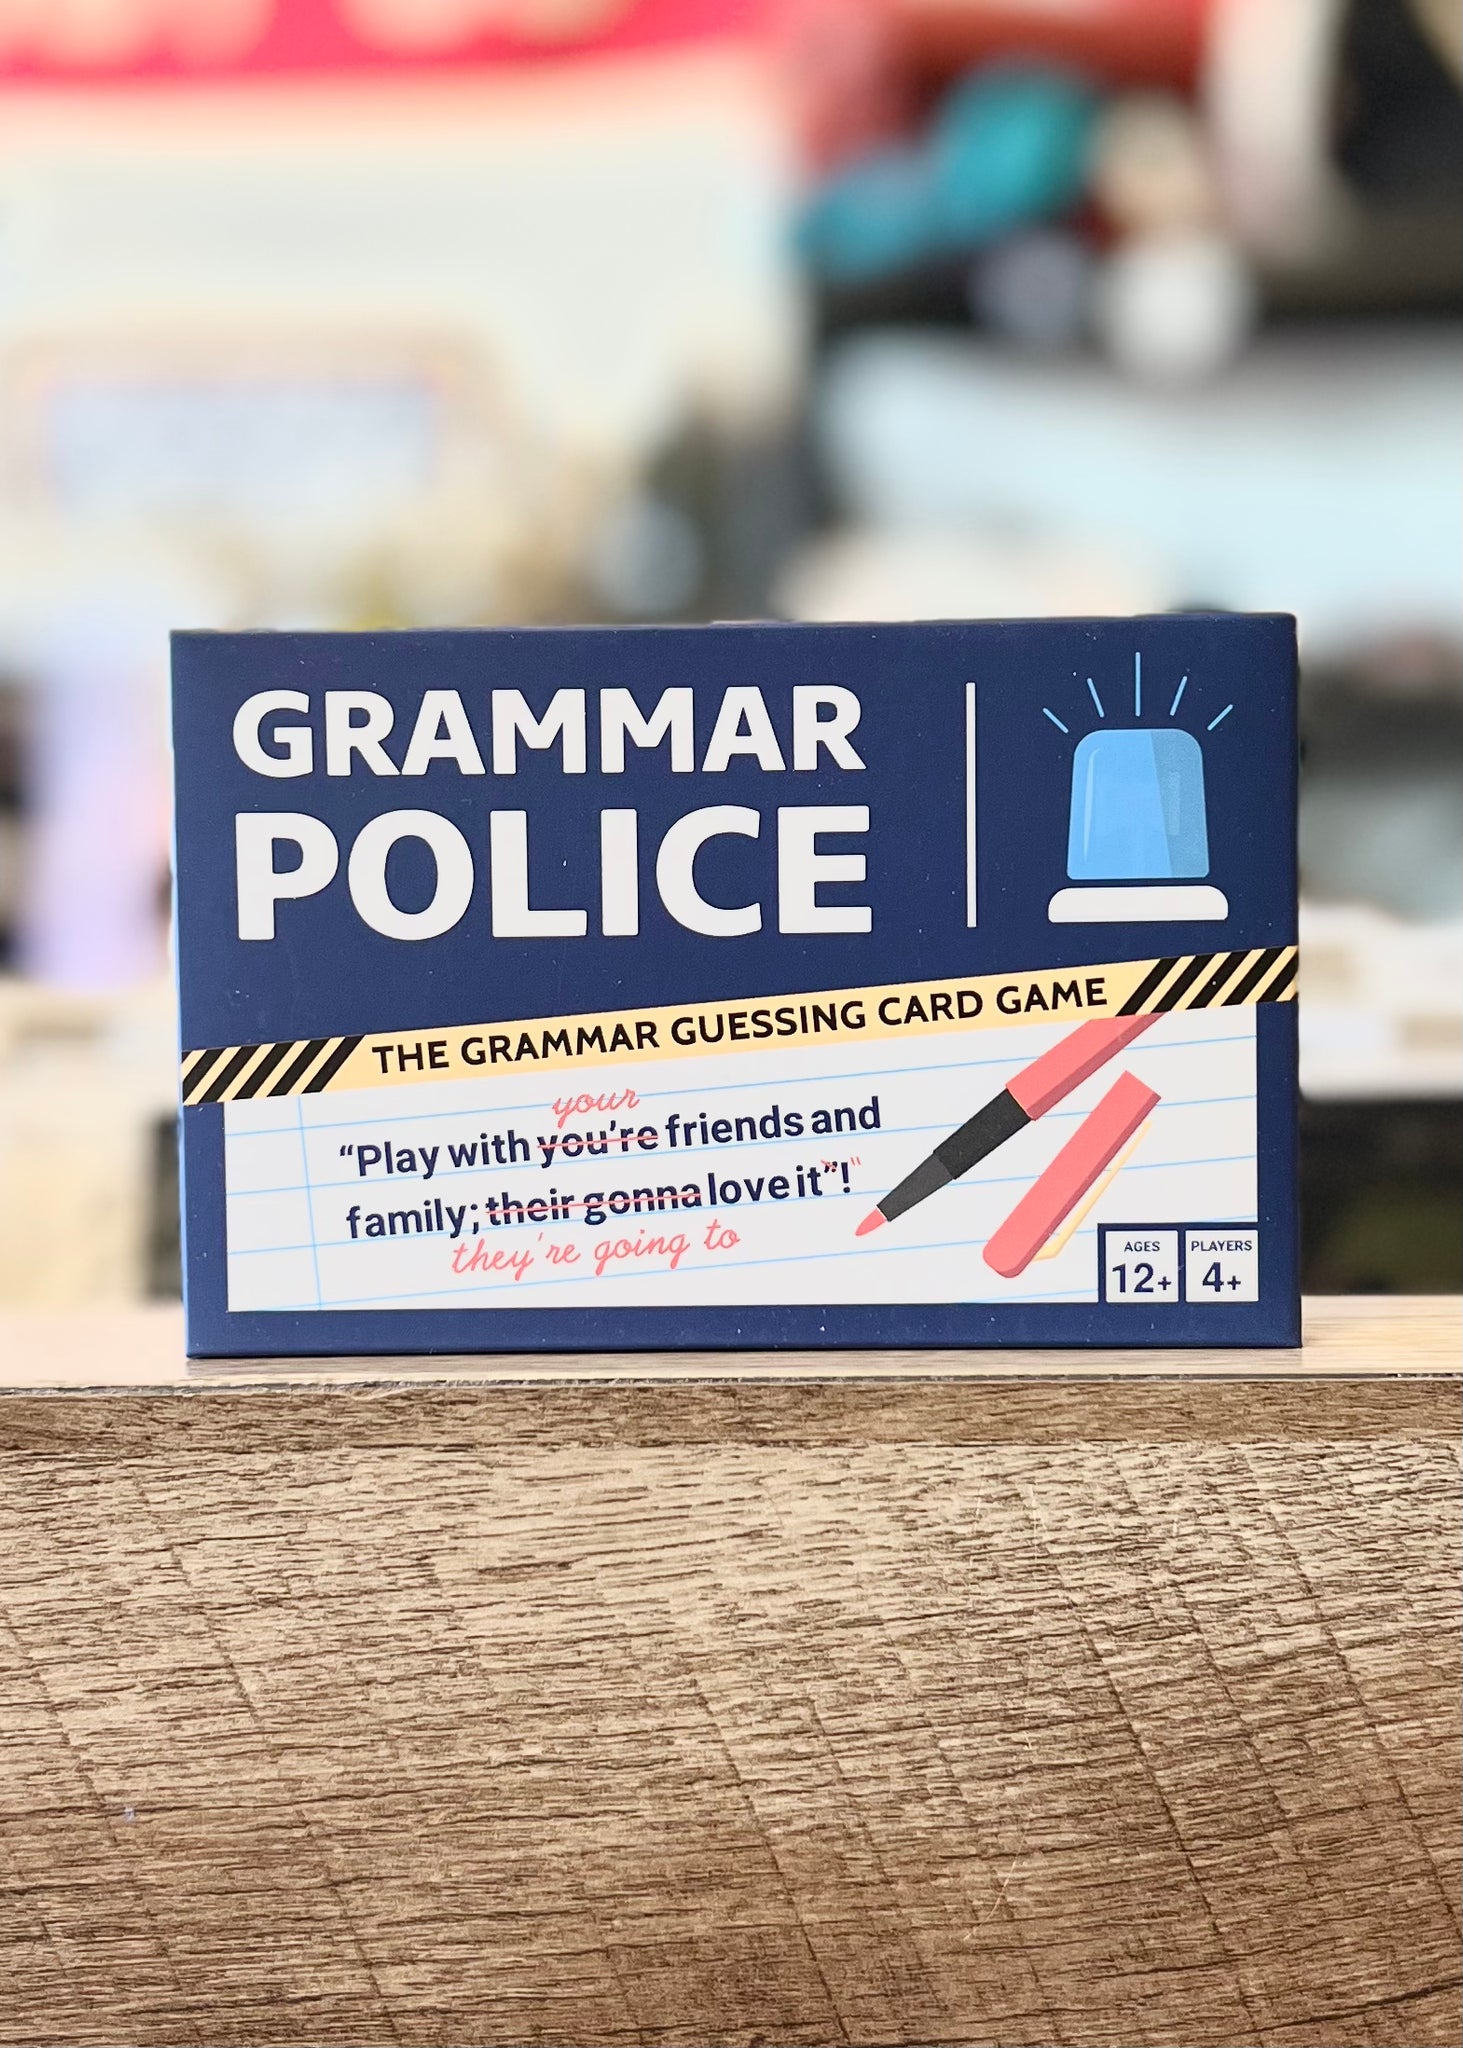 Grammar Police, The grammar guessing card game by Bubblegum Stuff, Sold by Le Monkey House